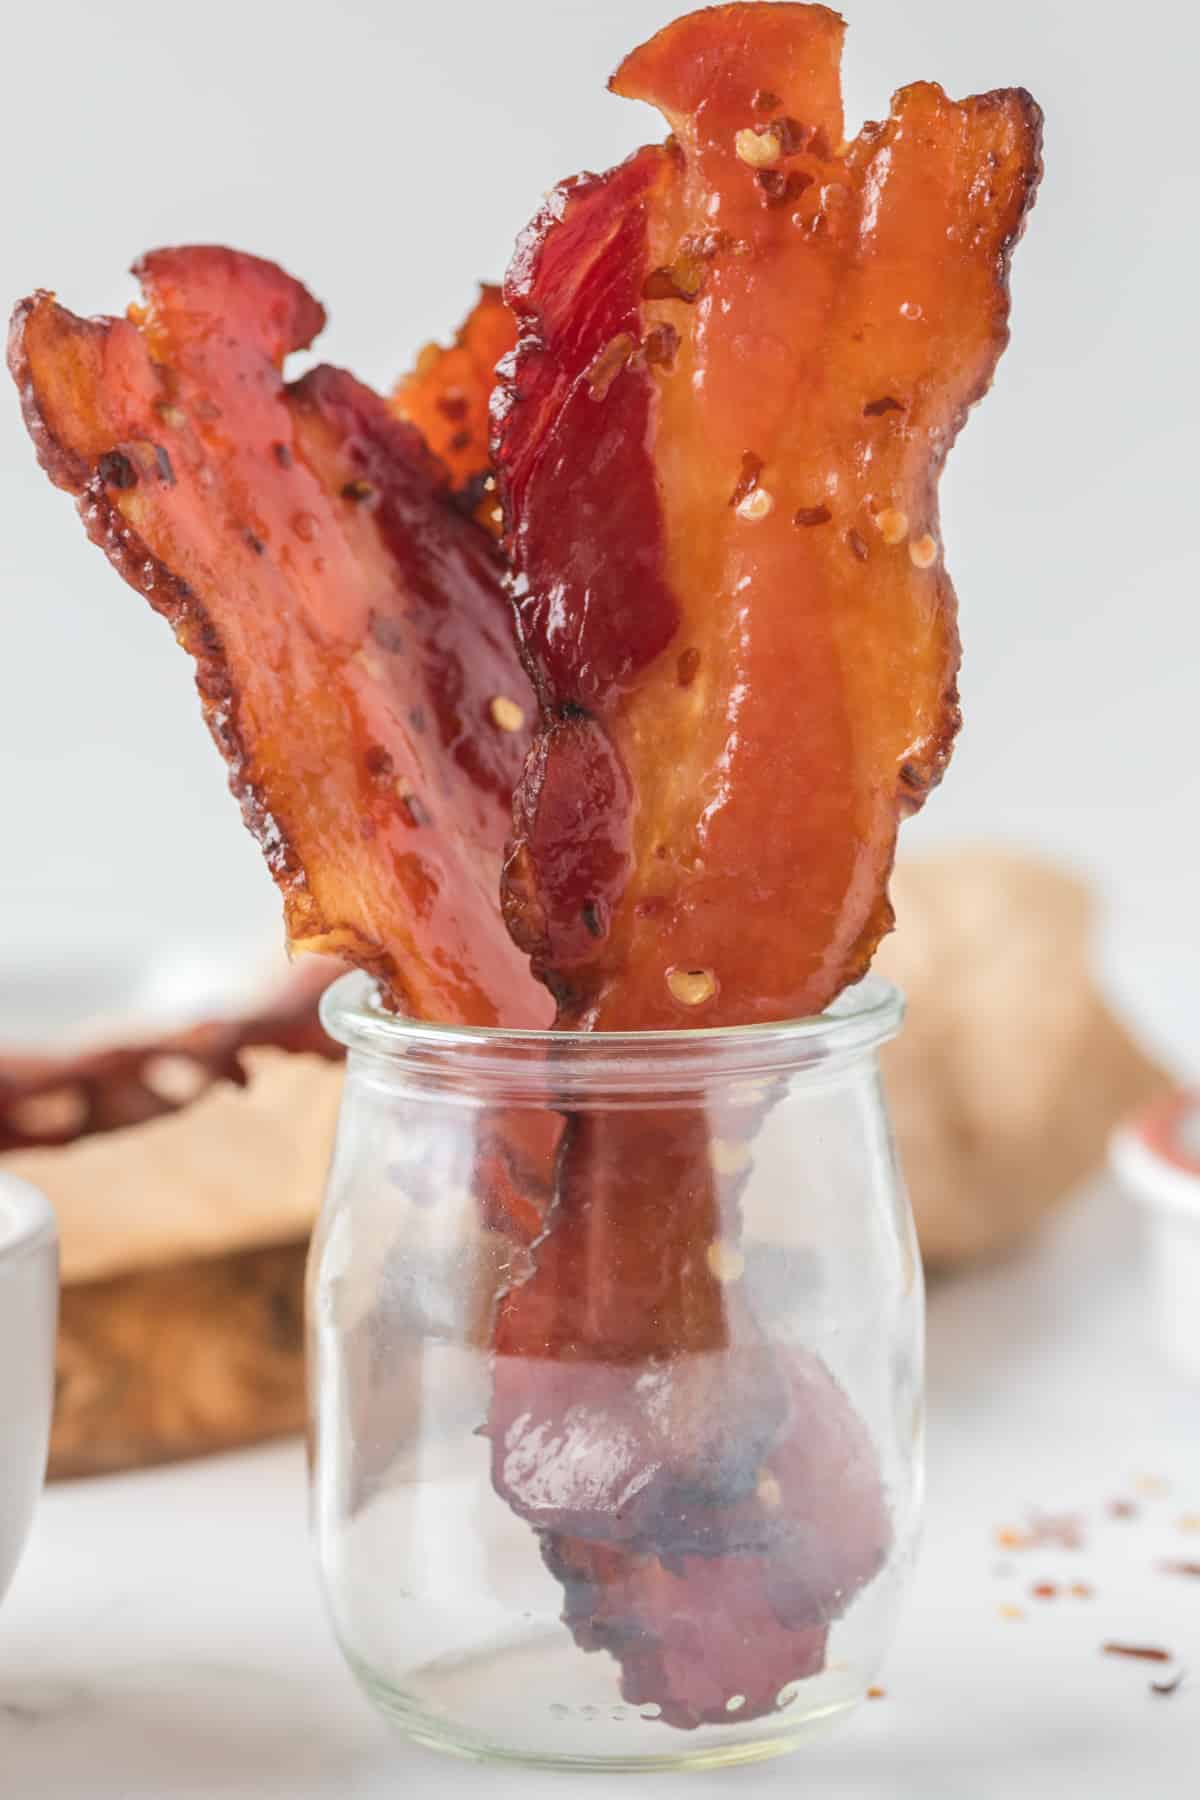 Bacon cooked in a glass jar.